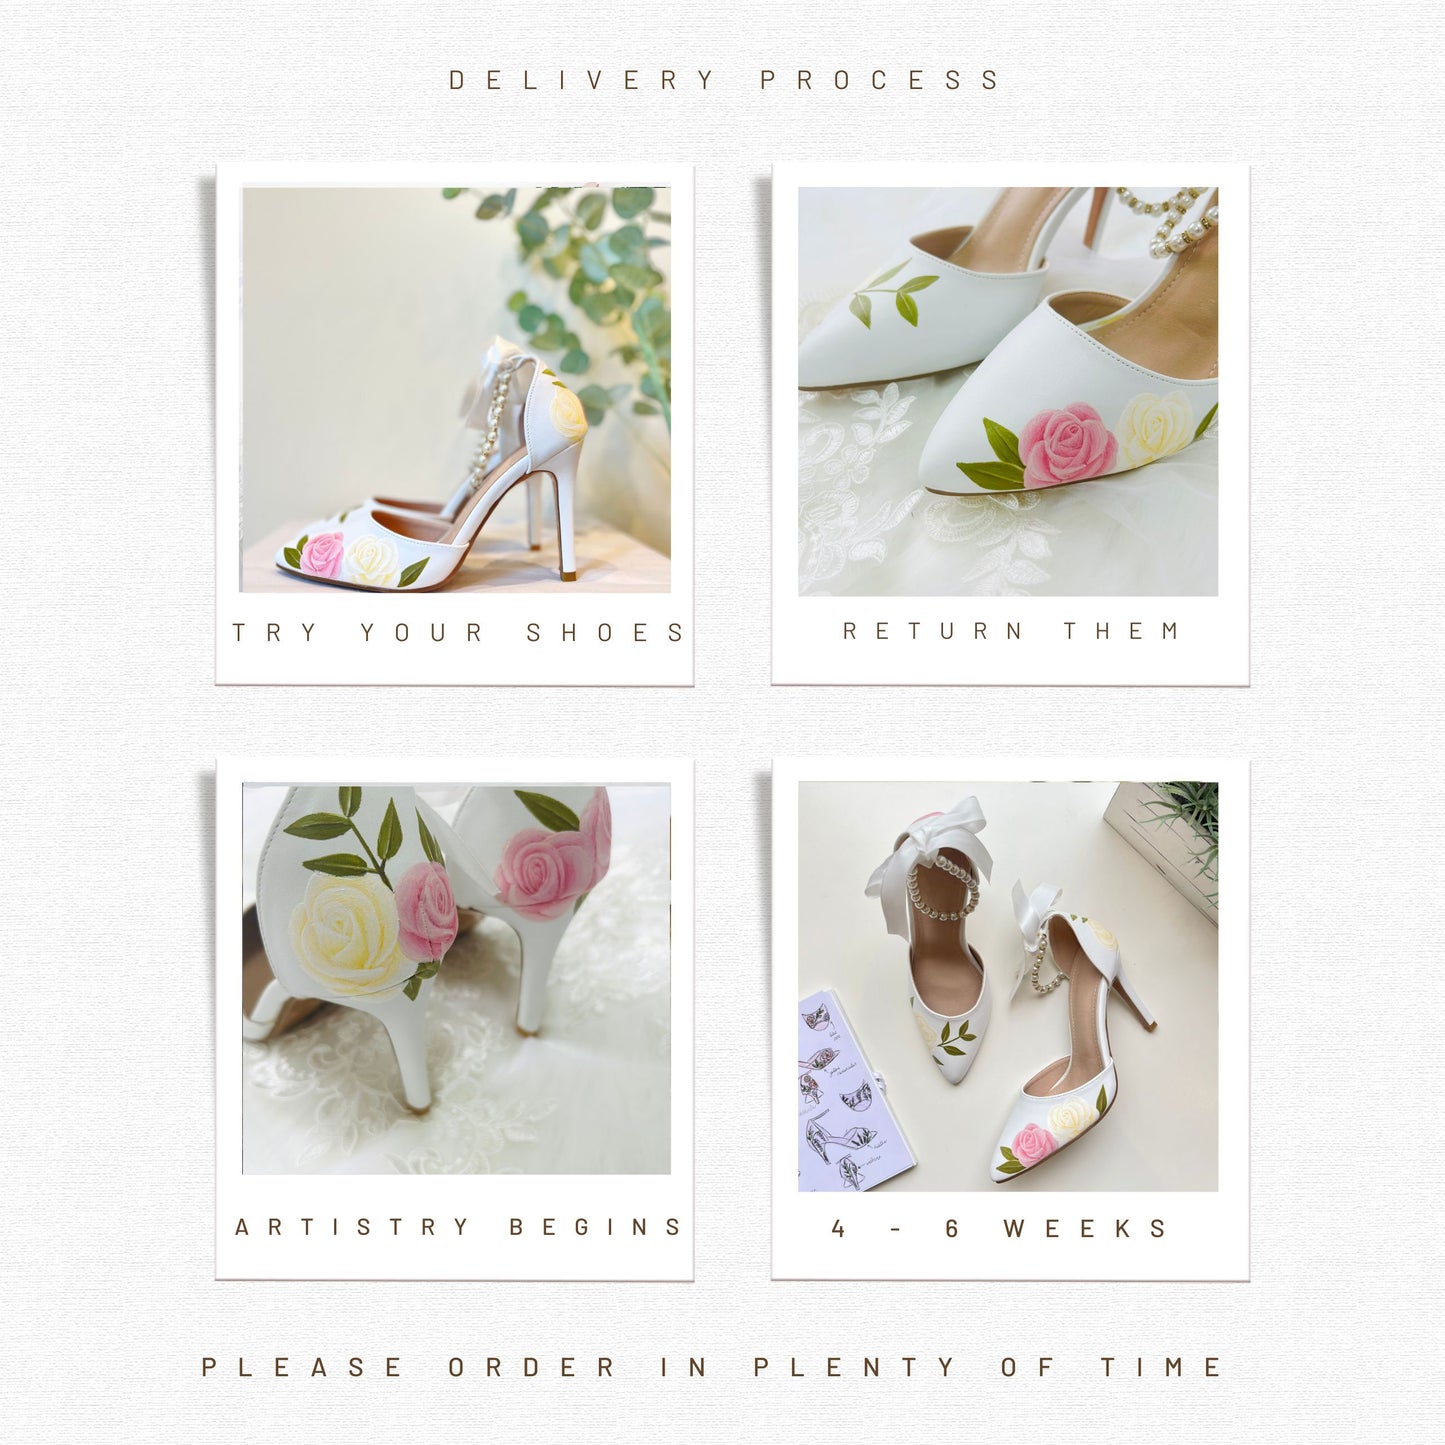 Vintage Rose Wedding Shoes | Bridal Shoes With Flowers